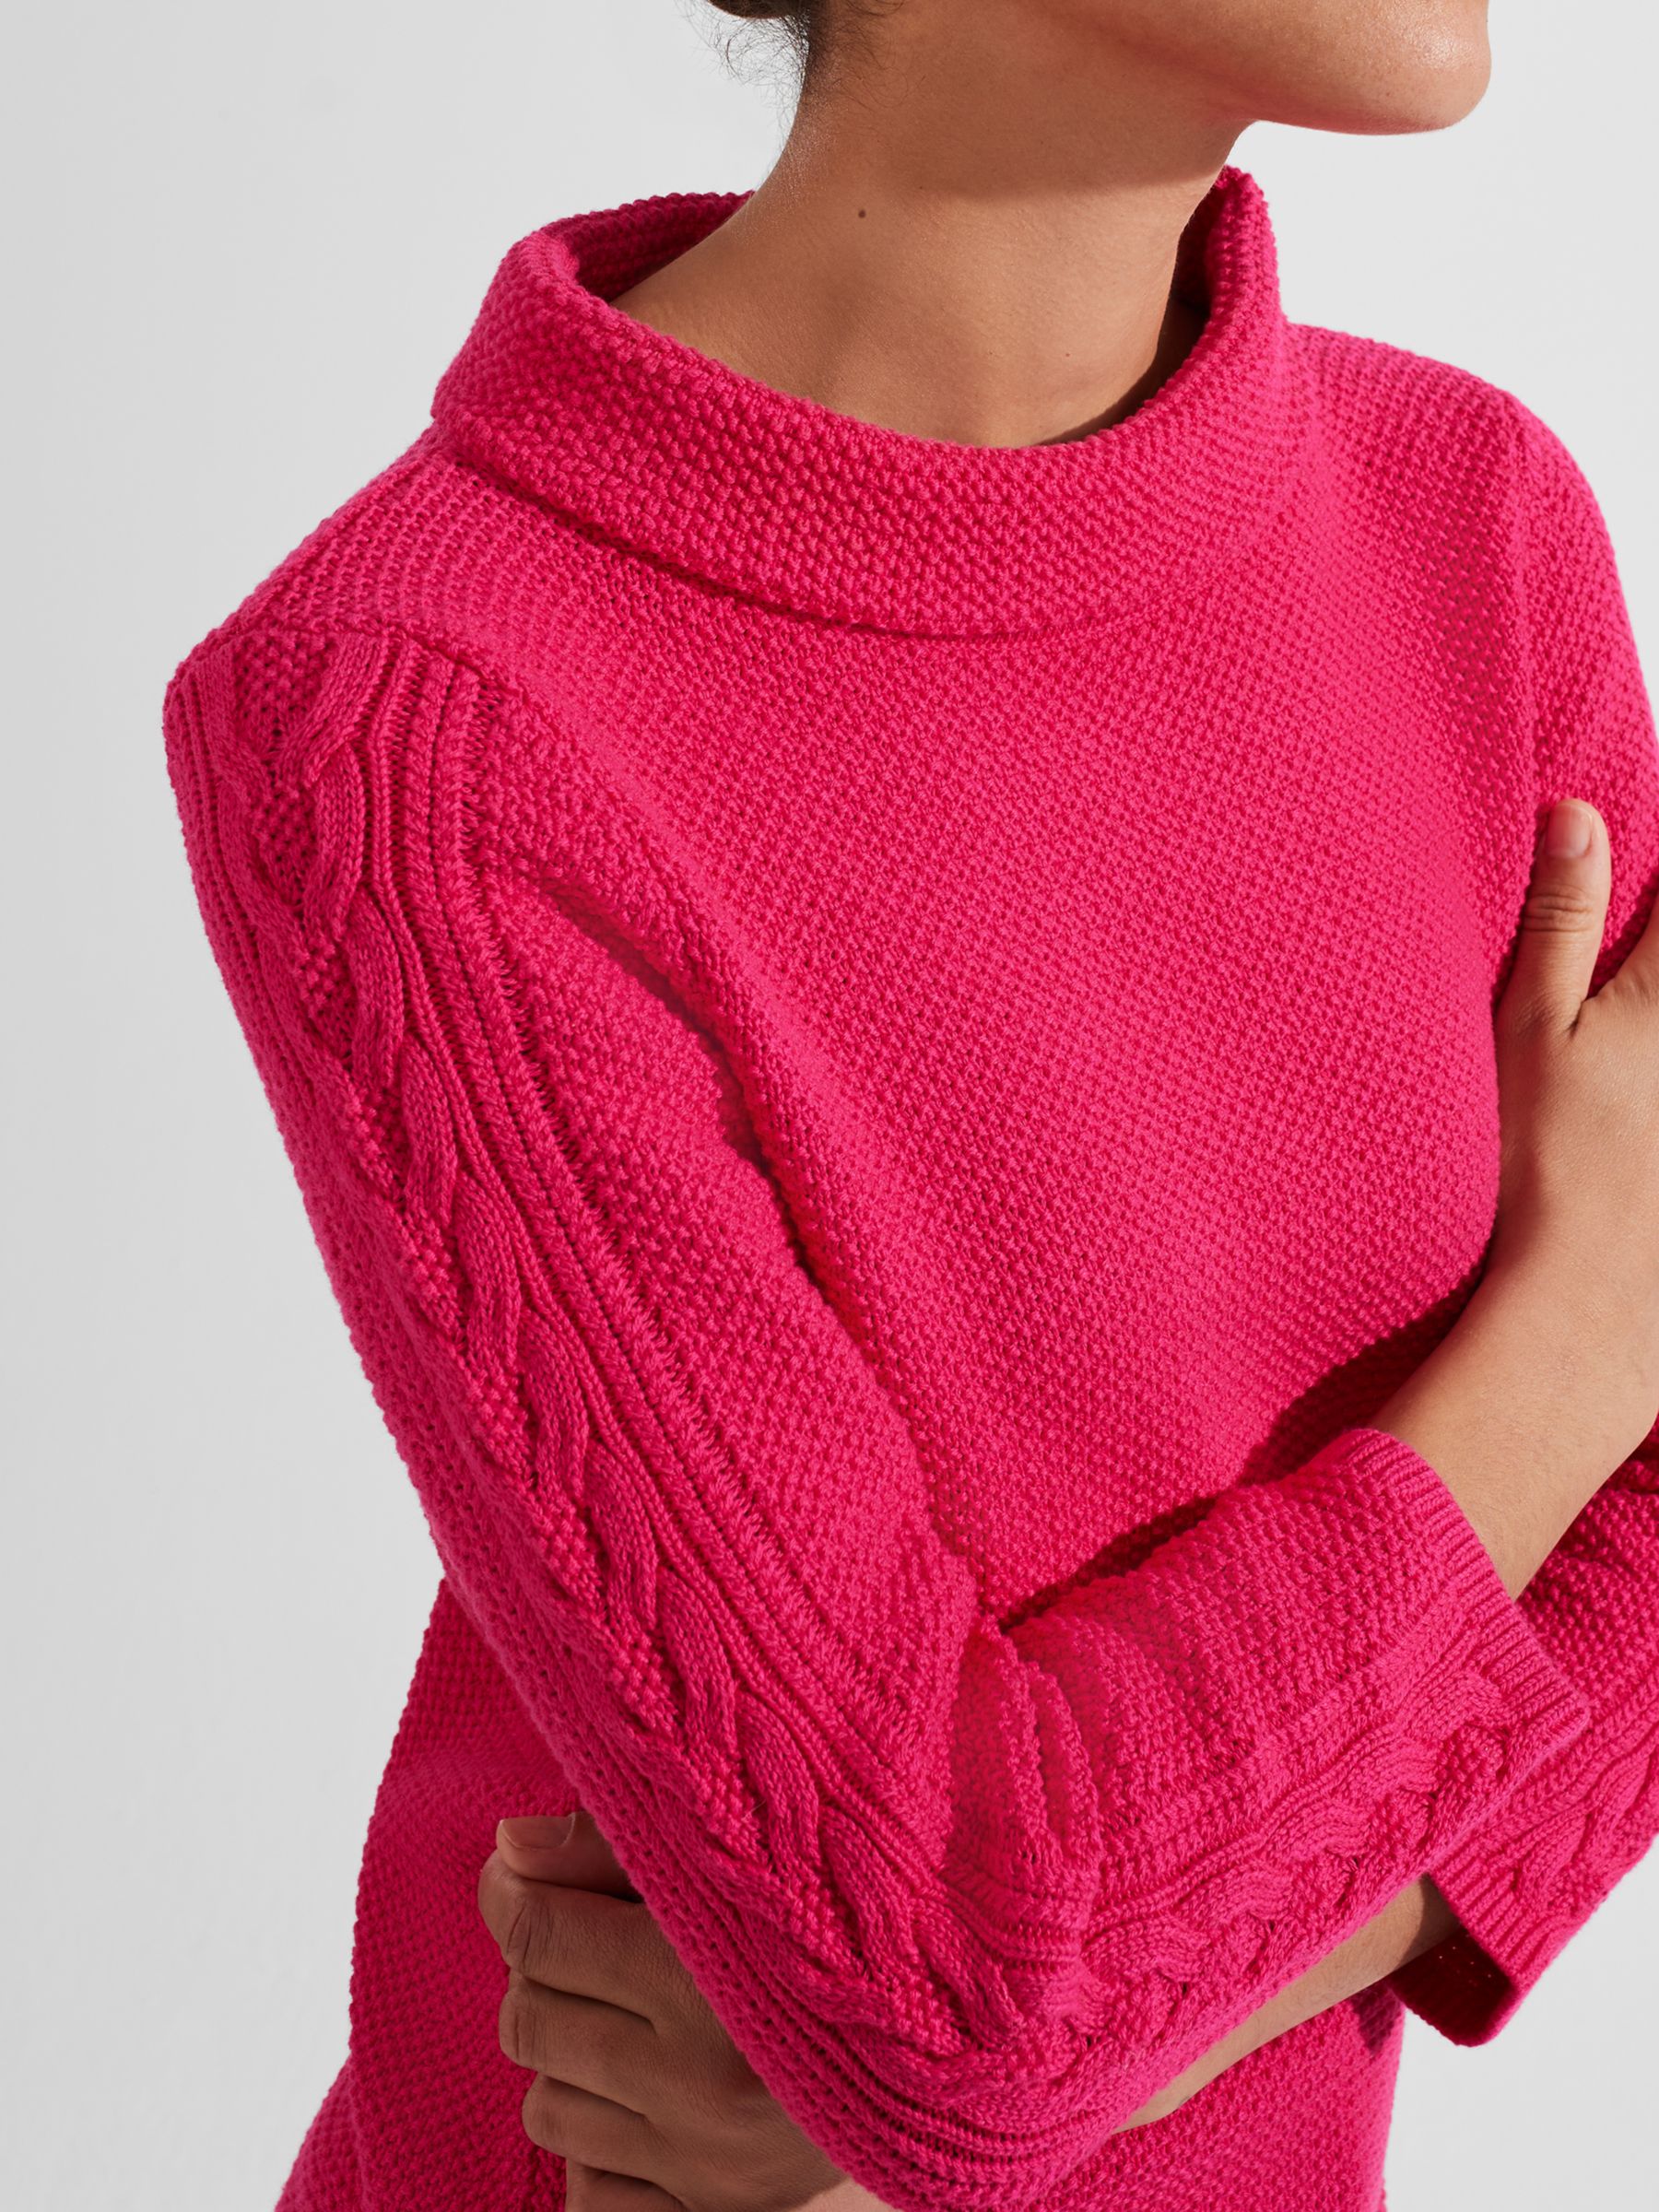 Hobbs Audrey Cashmere and Wool Jumper, Pink Marl at John Lewis & Partners